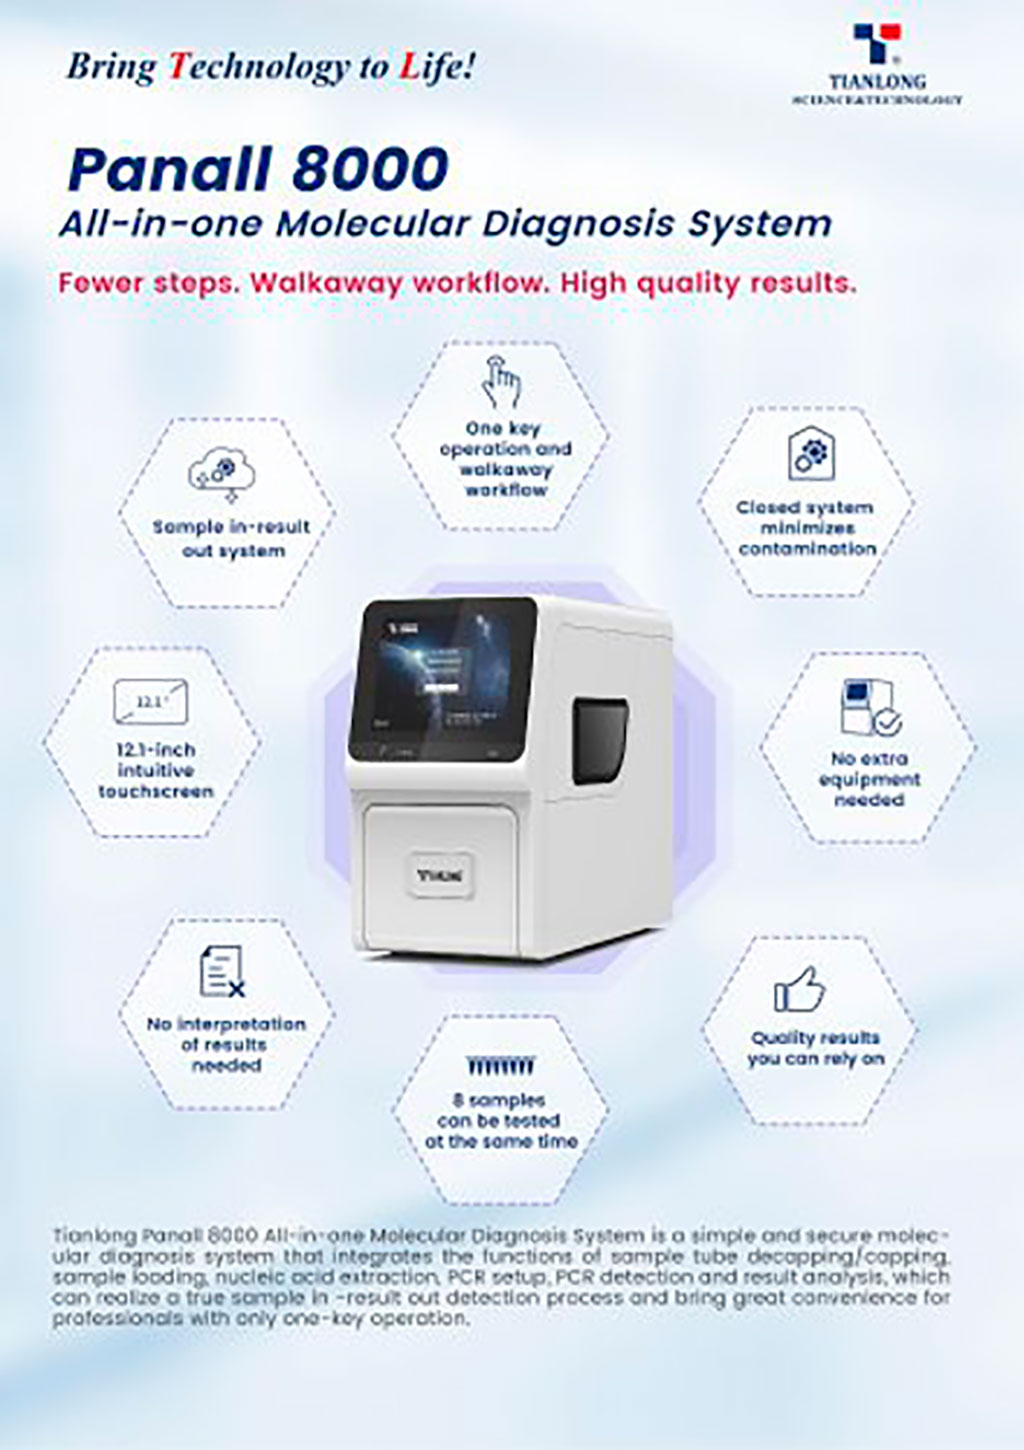 Image: The Panall 8000 molecular diagnostic system will be launched in the first quarter of 2023 (Photo courtesy of Tianlong)